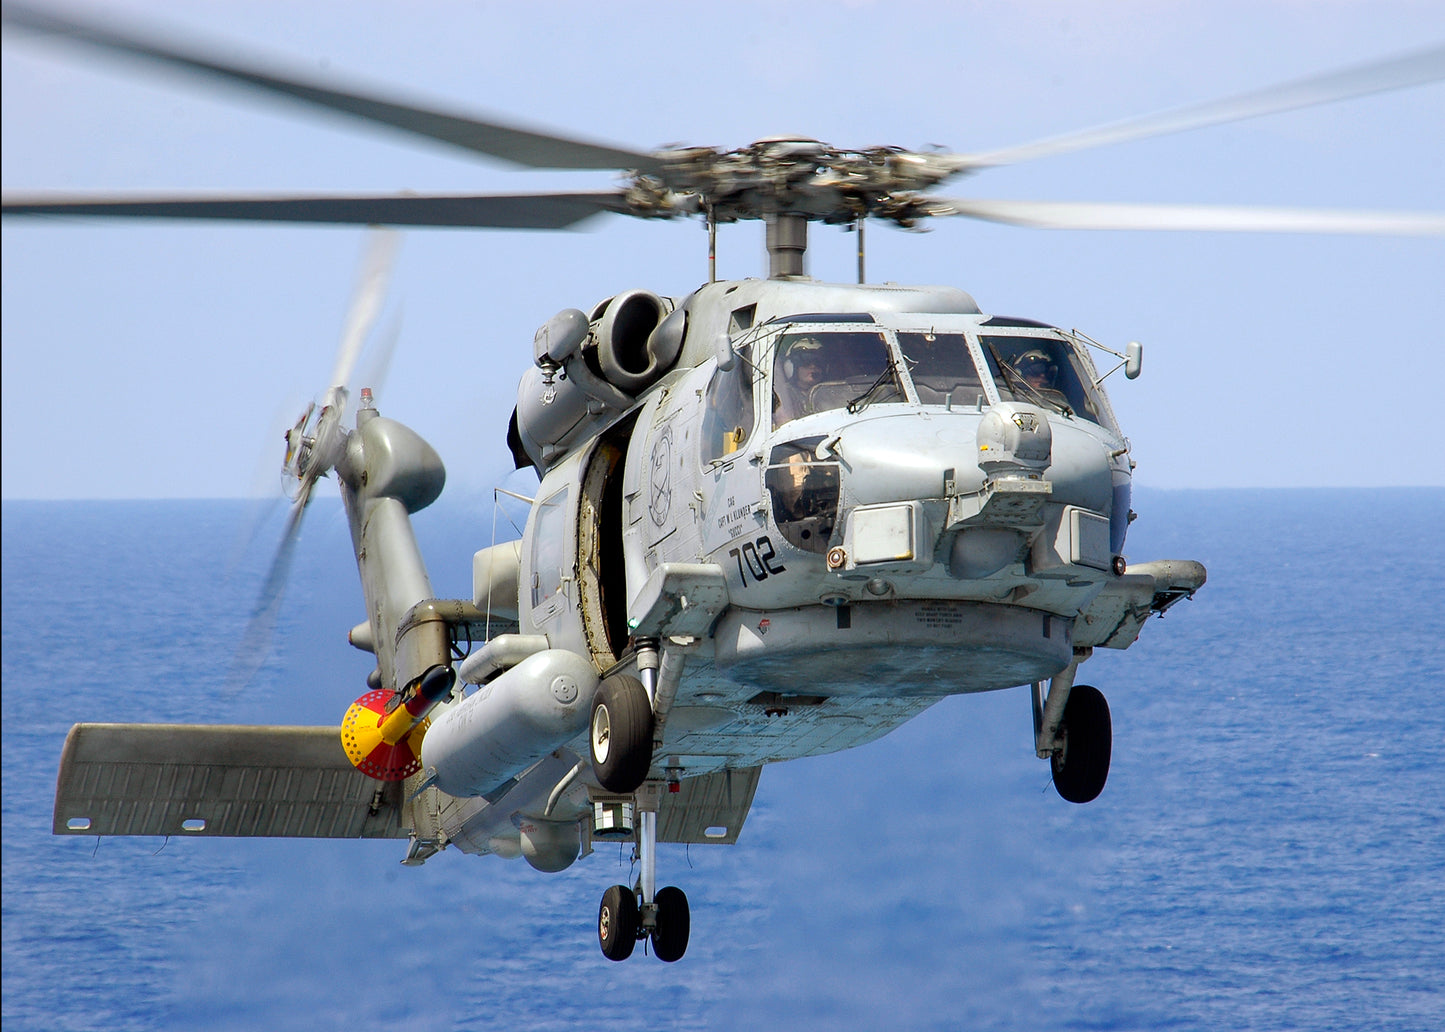 SIKORSKY SH-60 SEAHAWK AIRCRAFT GLOSSY POSTER PICTURE PHOTO PRINT BANNER